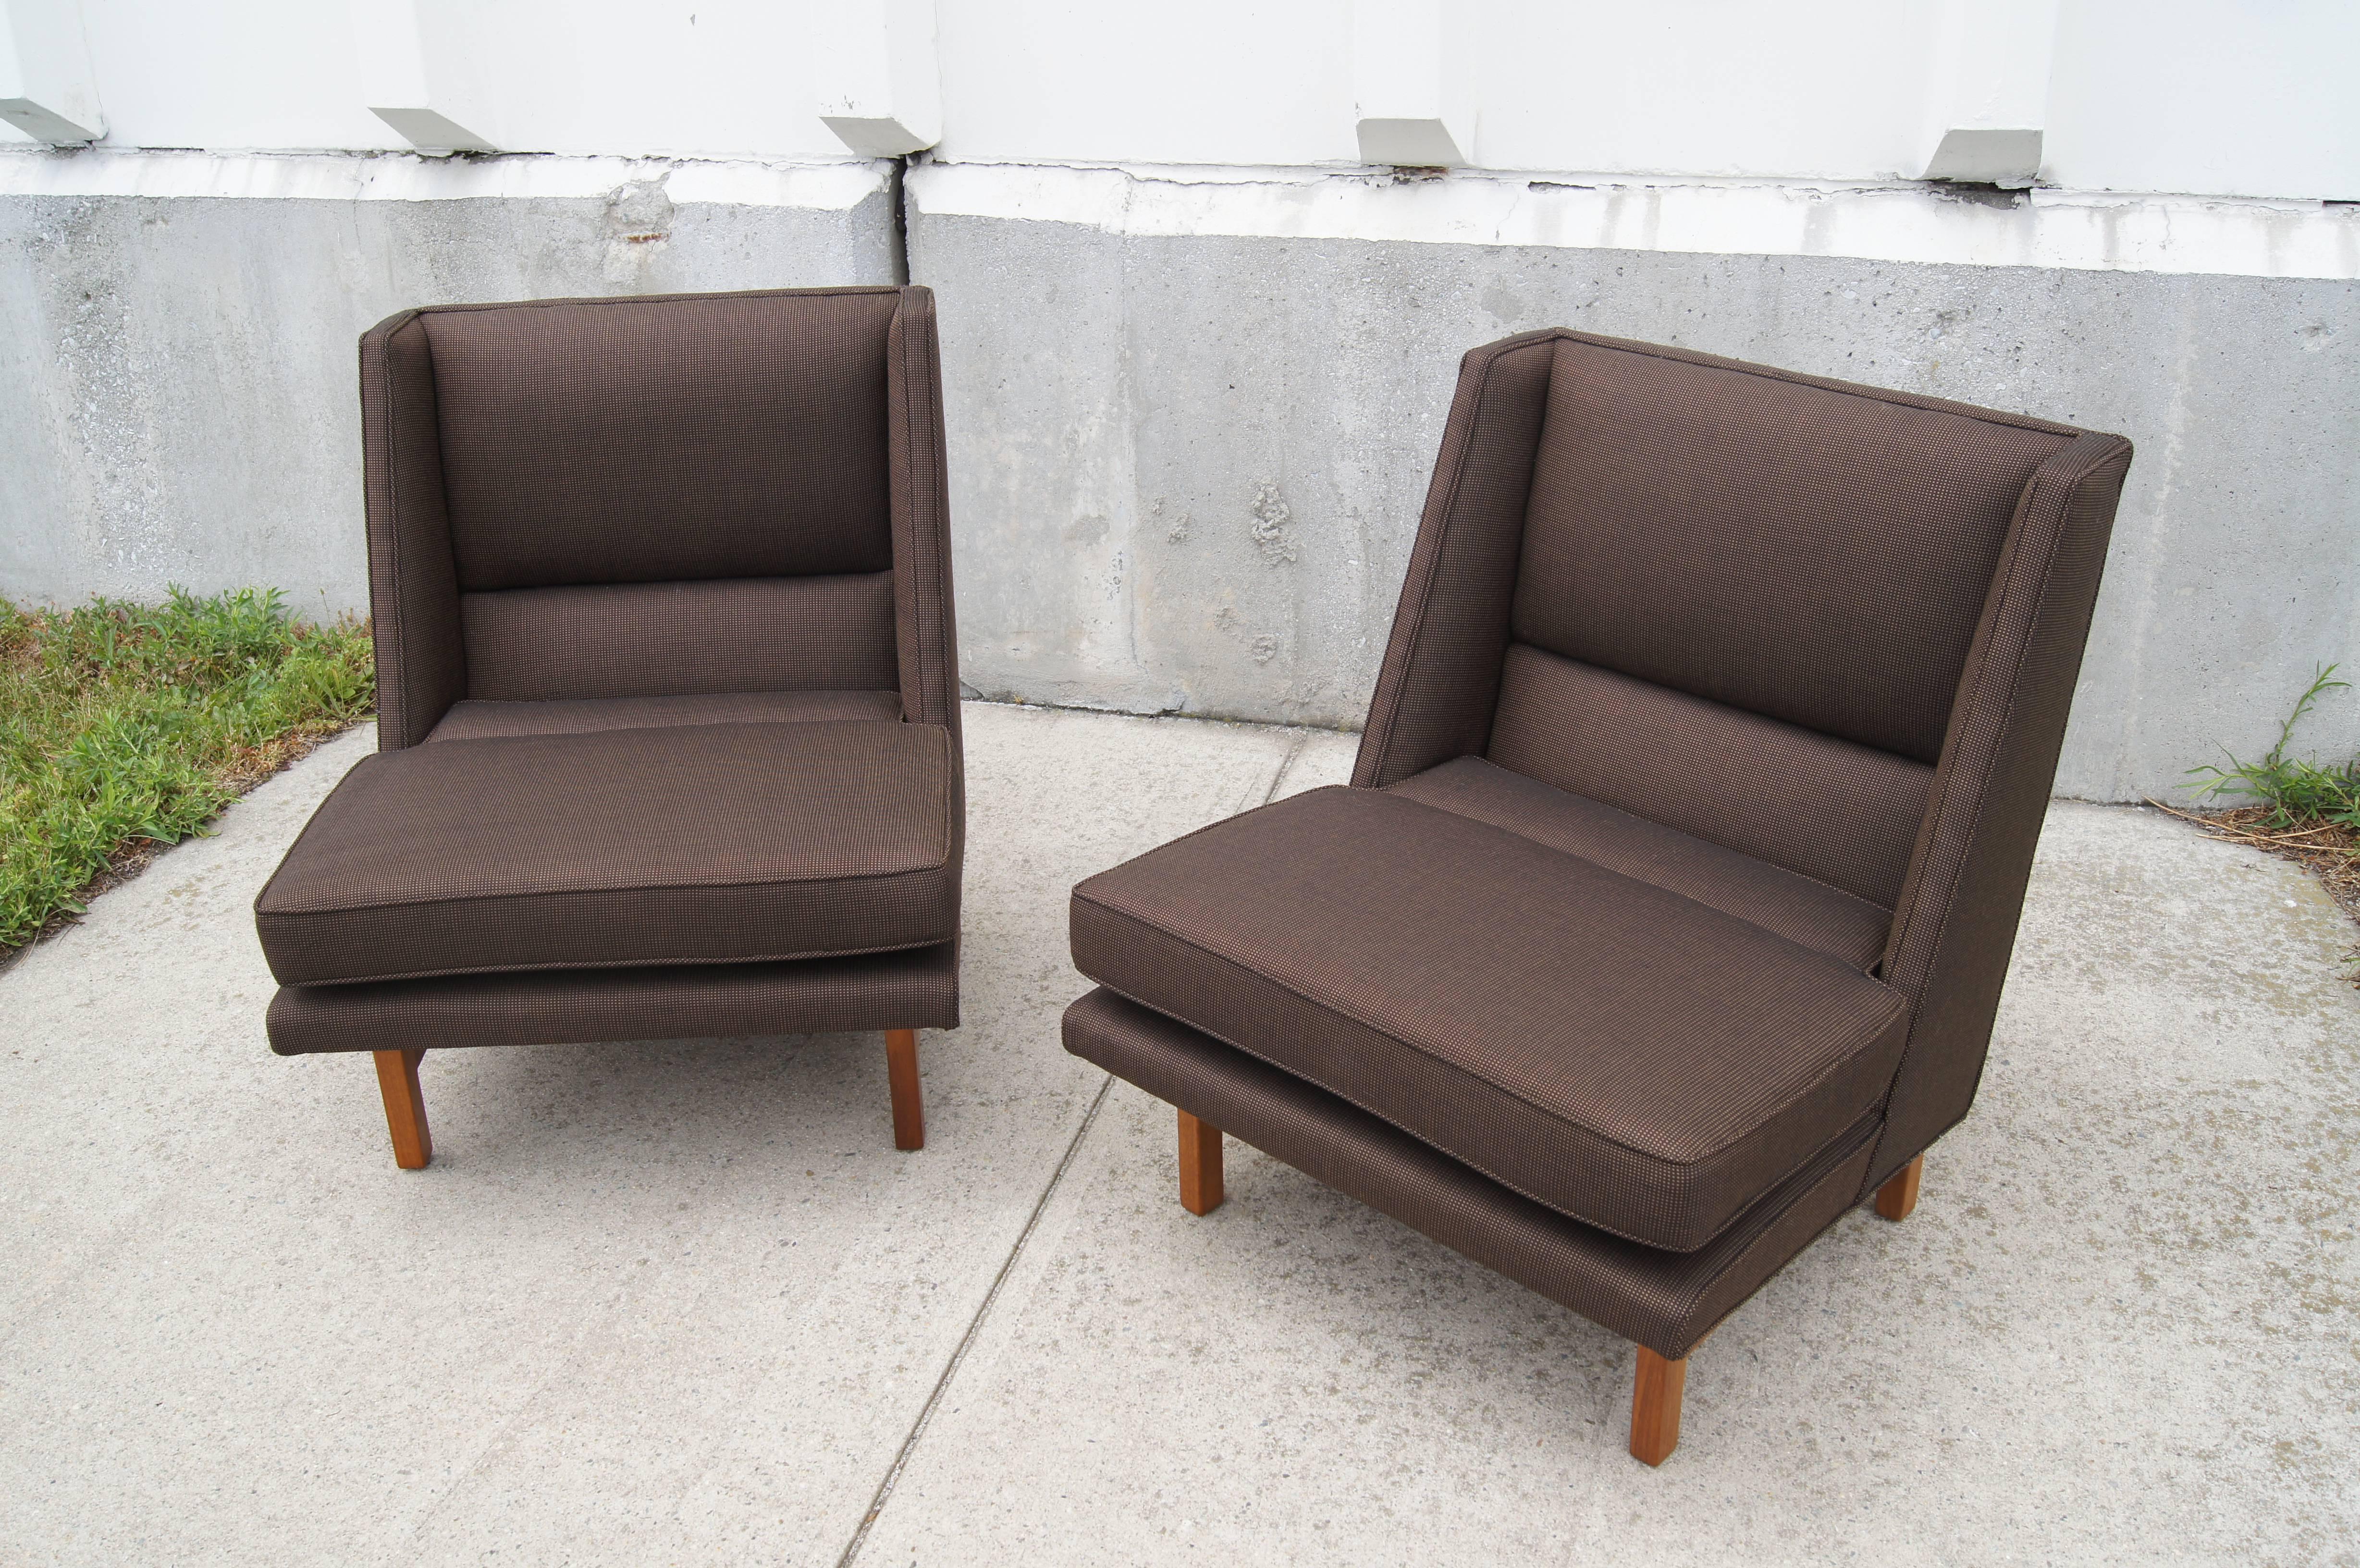 American Pair of Low Lounge Chairs by Edward Wormley for Dunbar